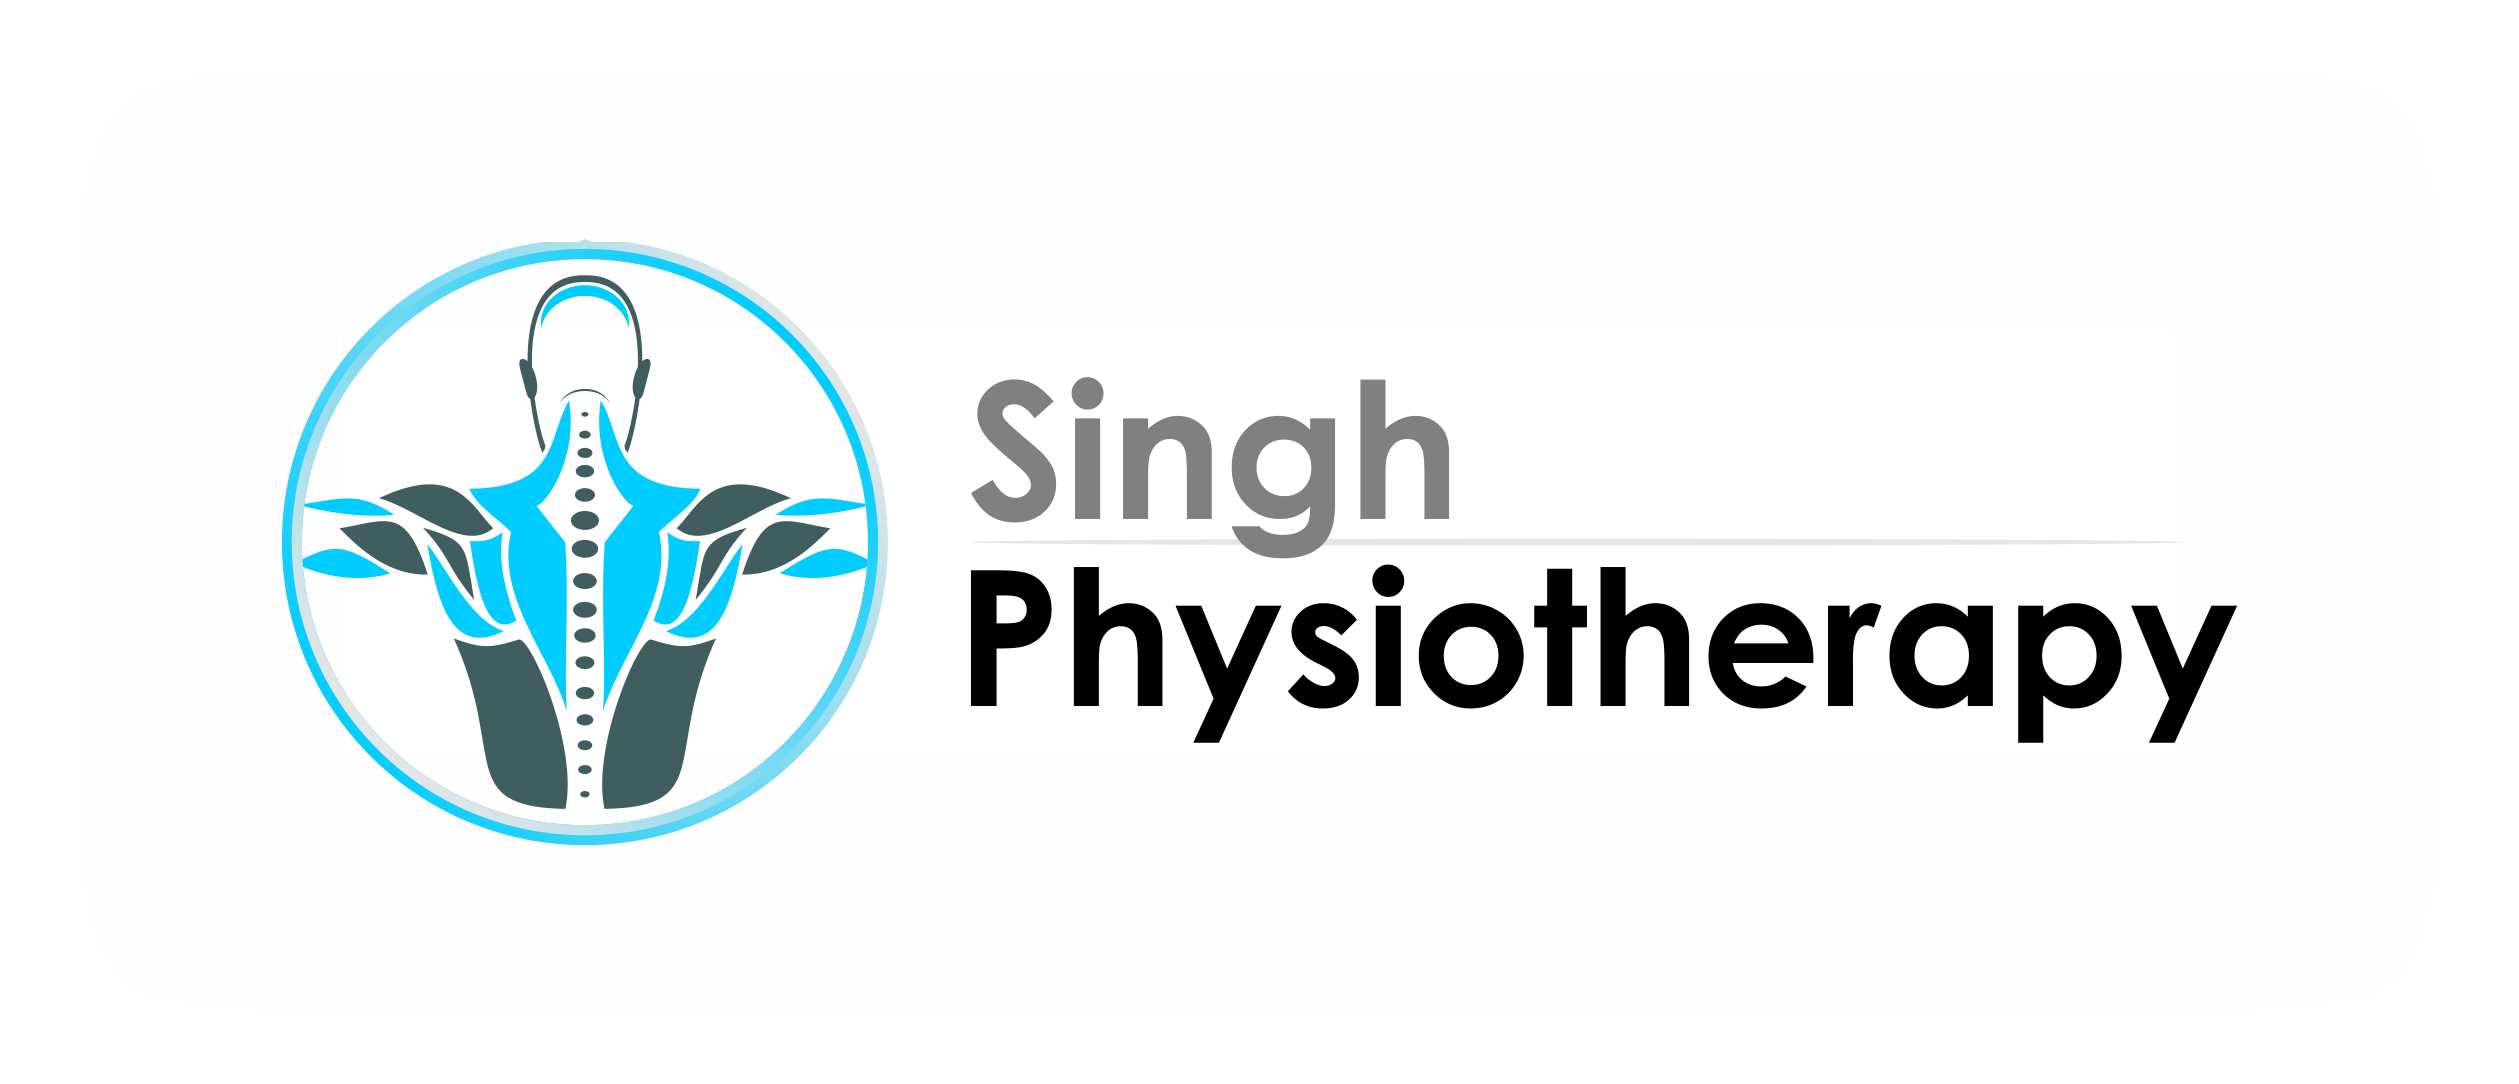 Singh Physiotherapy|Veterinary|Medical Services